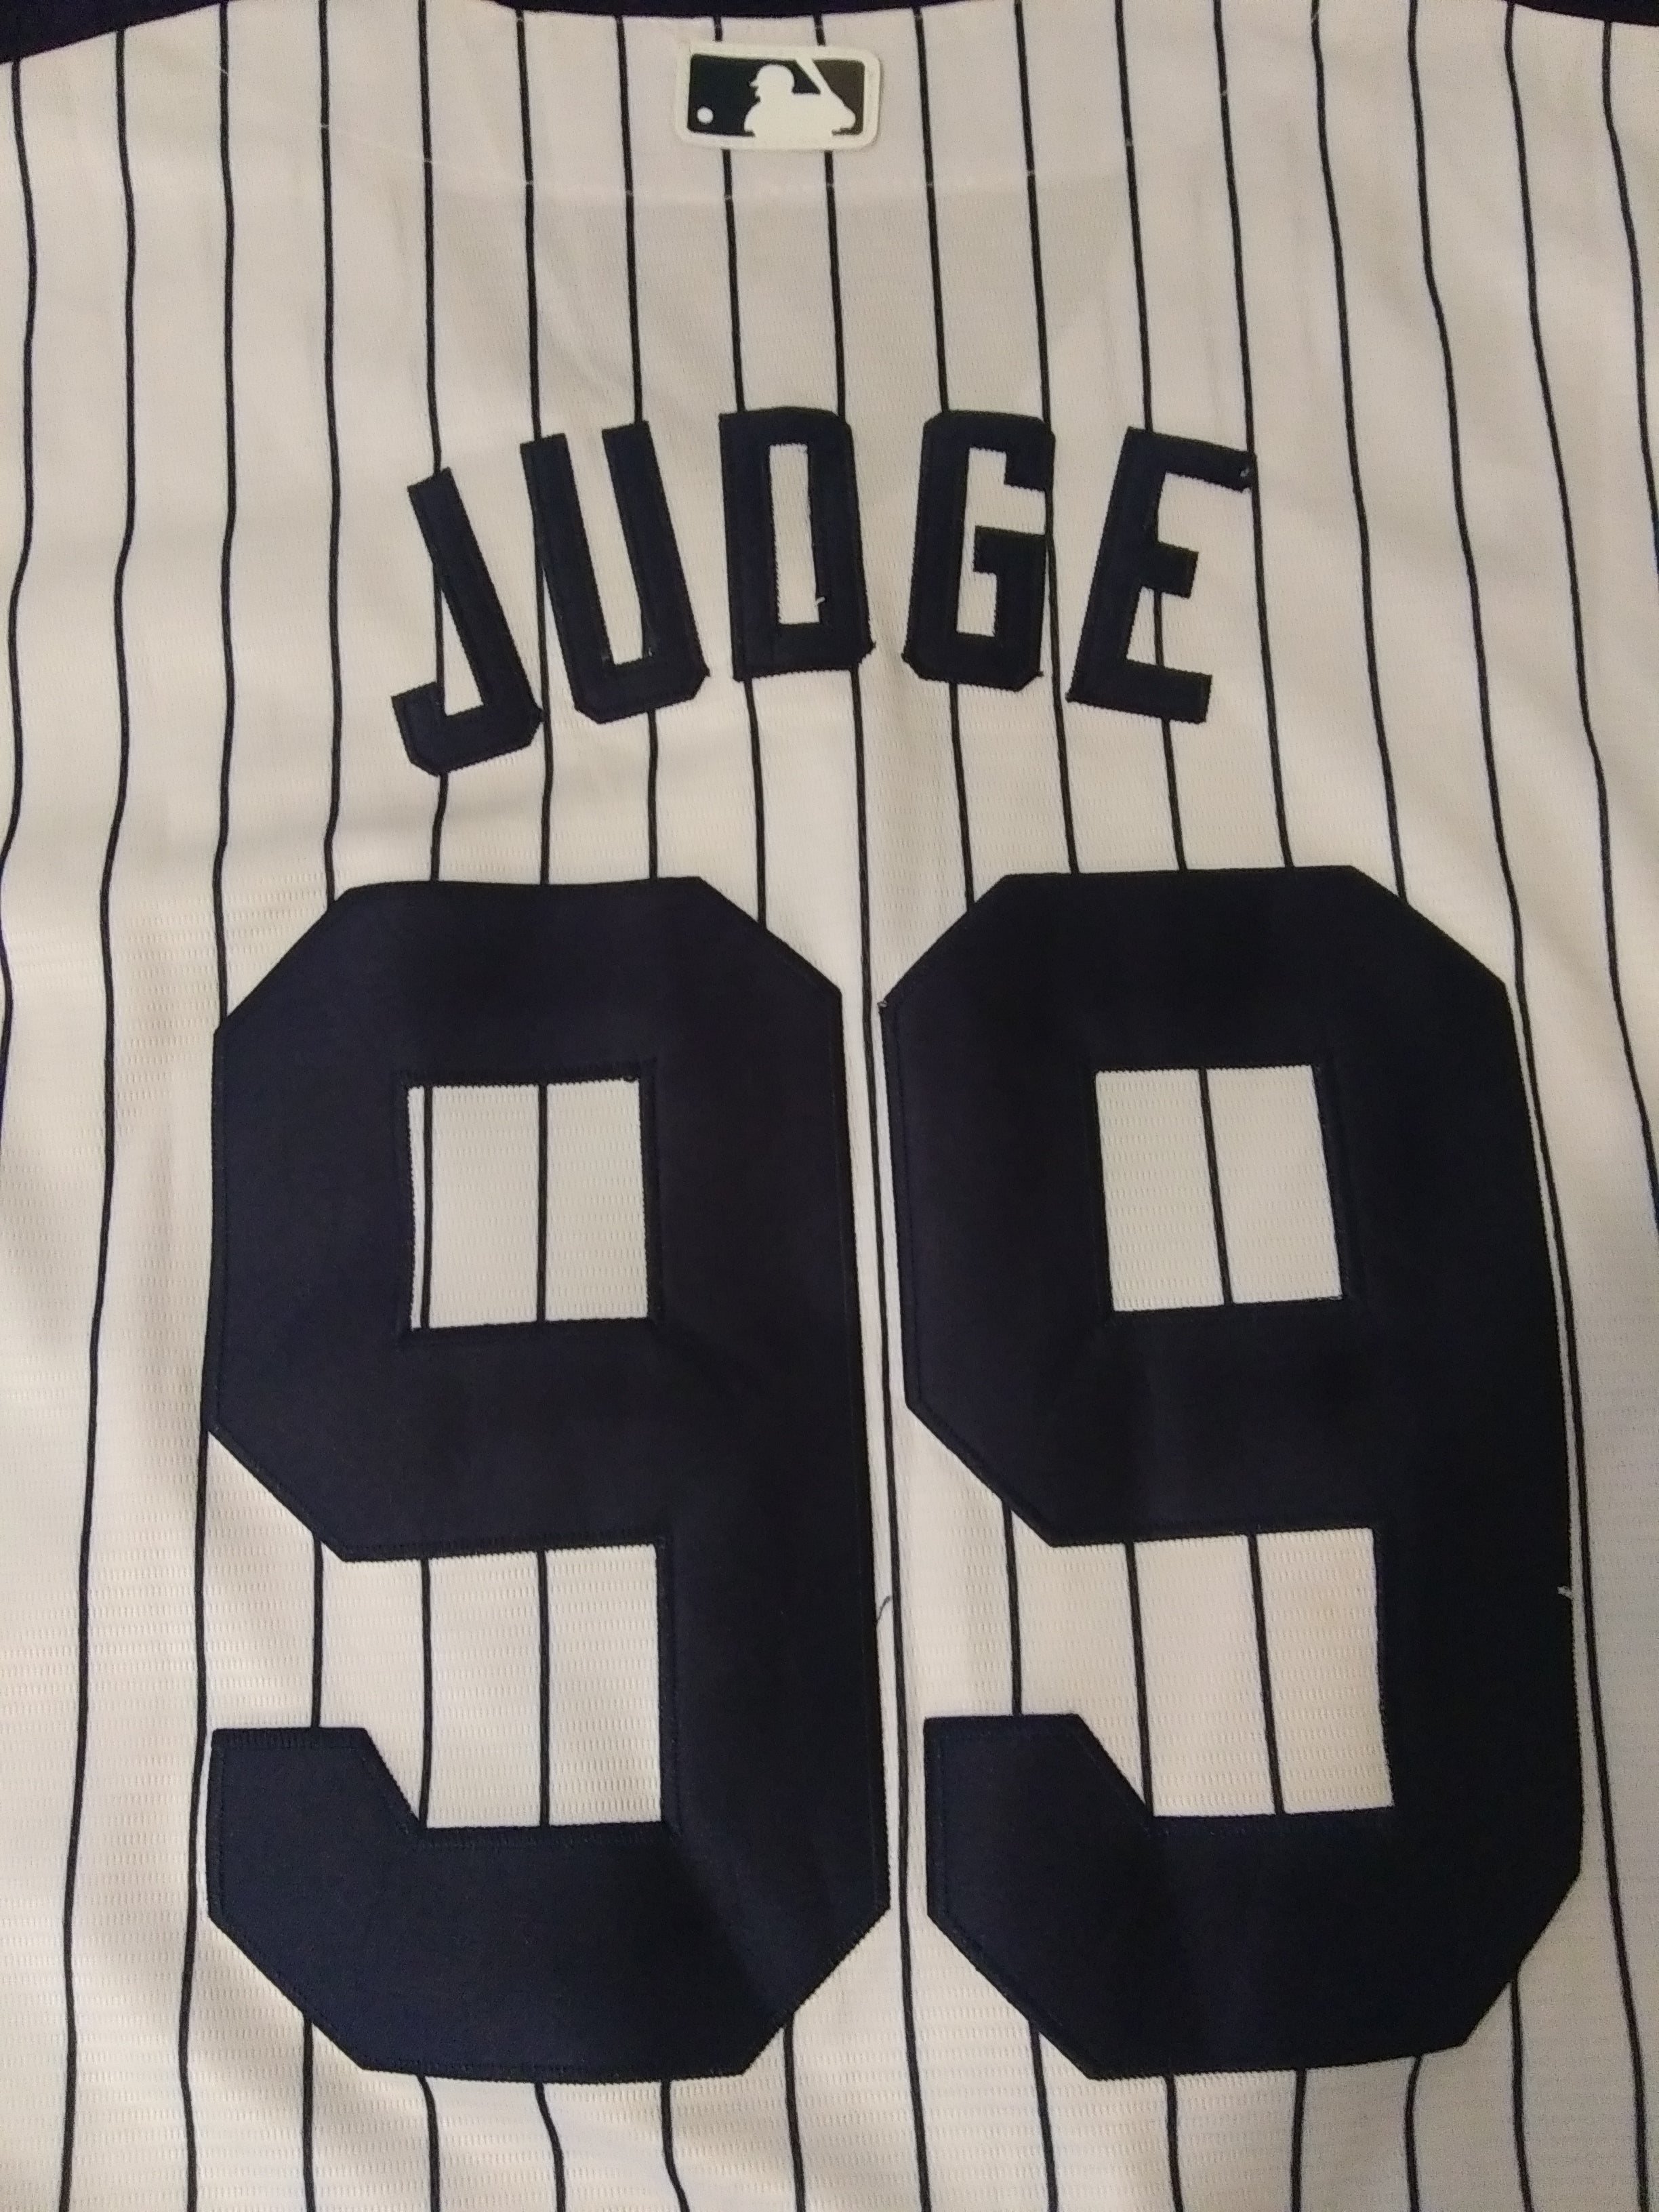 Brand New New York Yankees Aaron Judge Jersey with Tags - Size Adult XL